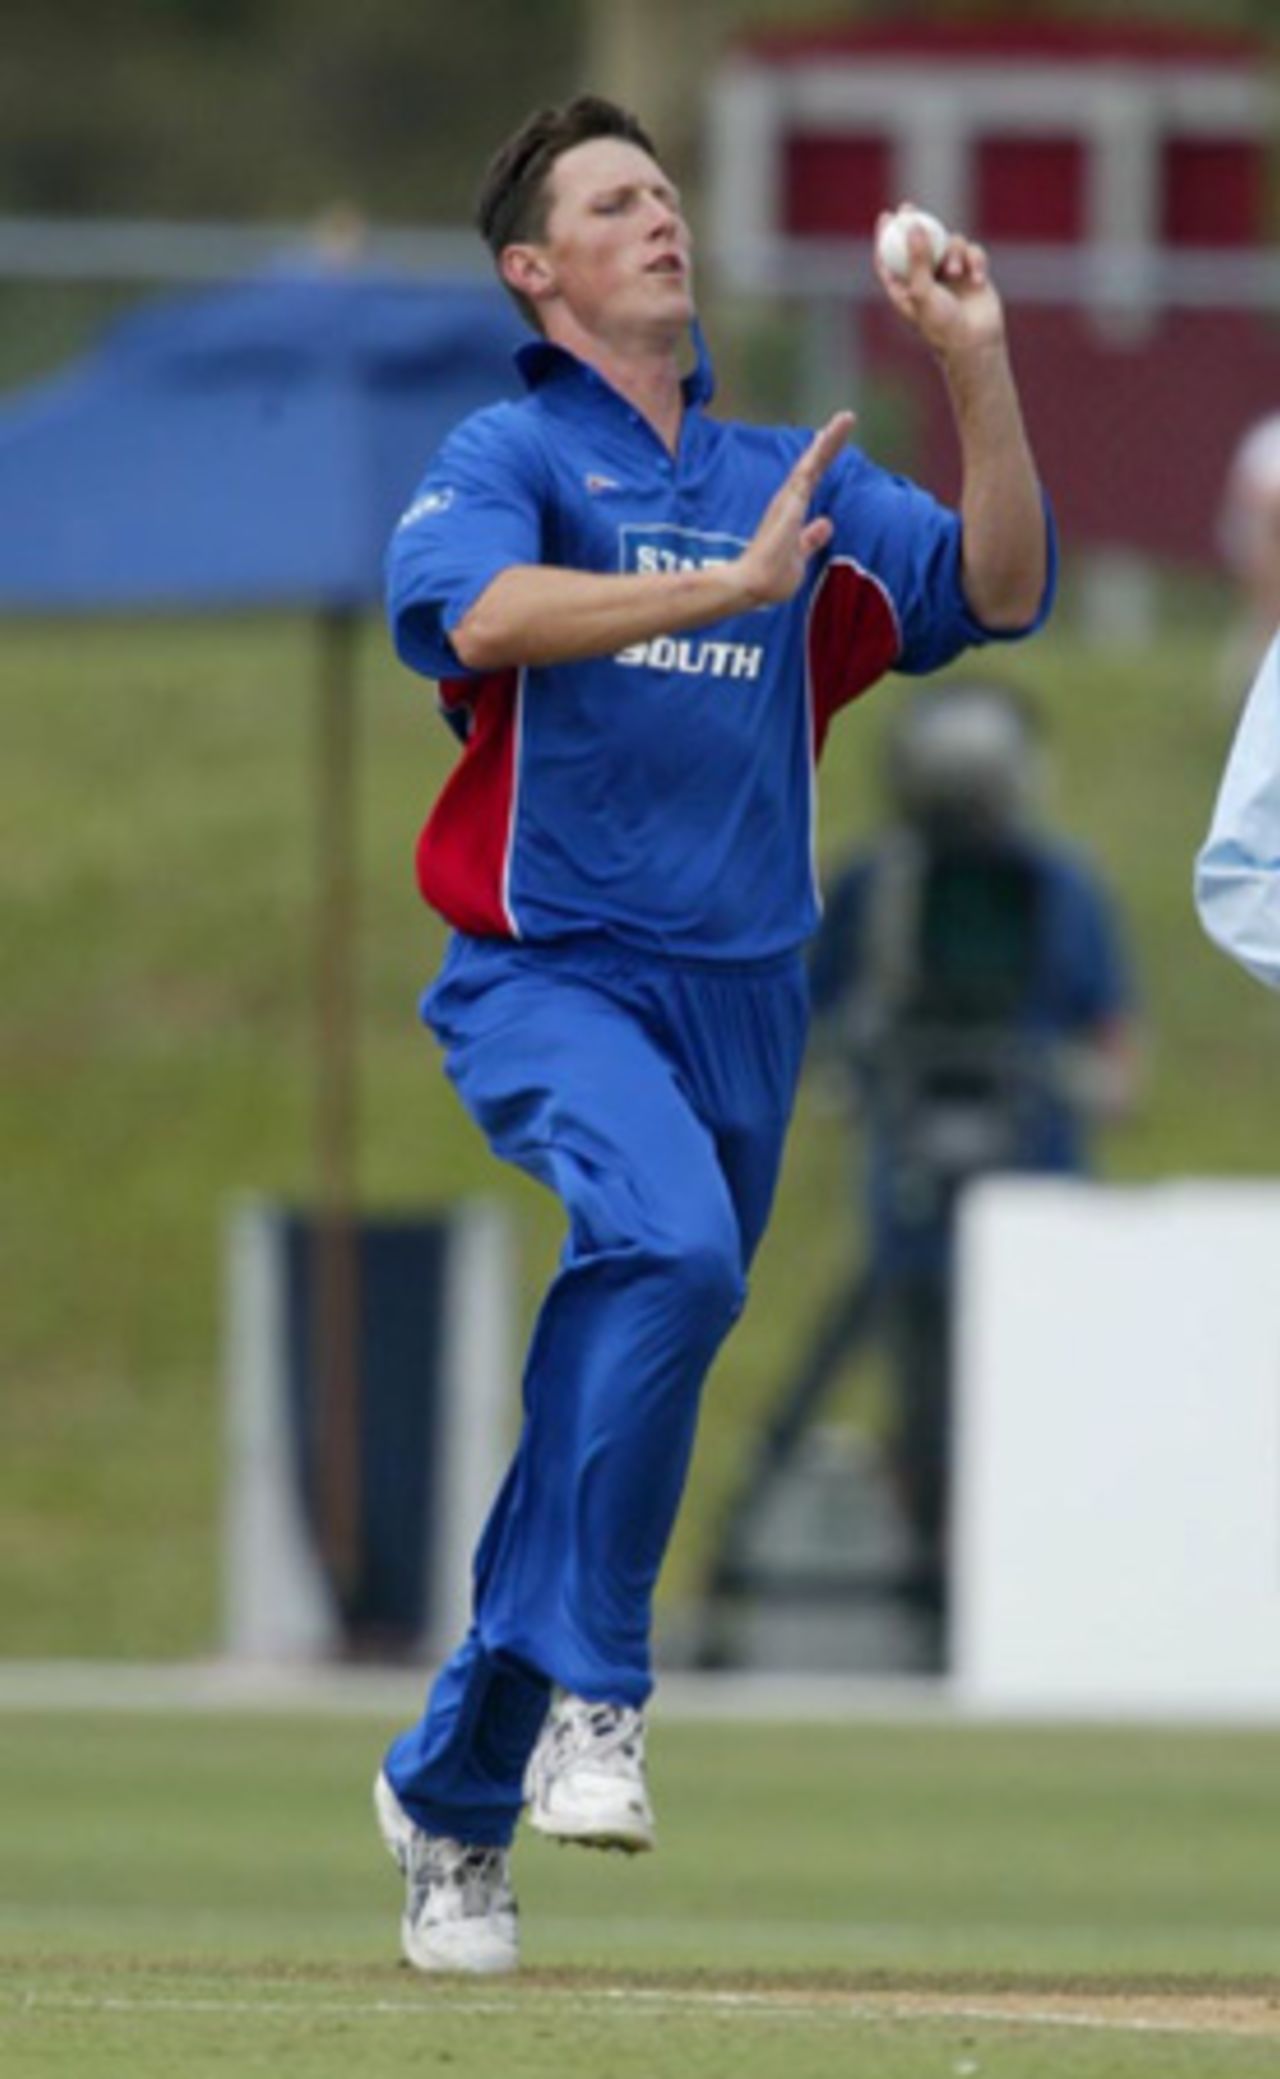 South Island bowler Shayne O'Connor delivers a ball during his first innings spell of 0-35 from four overs. State of Origin: North Island v South Island at North Harbour Stadium, Auckland, 2 February 2003.